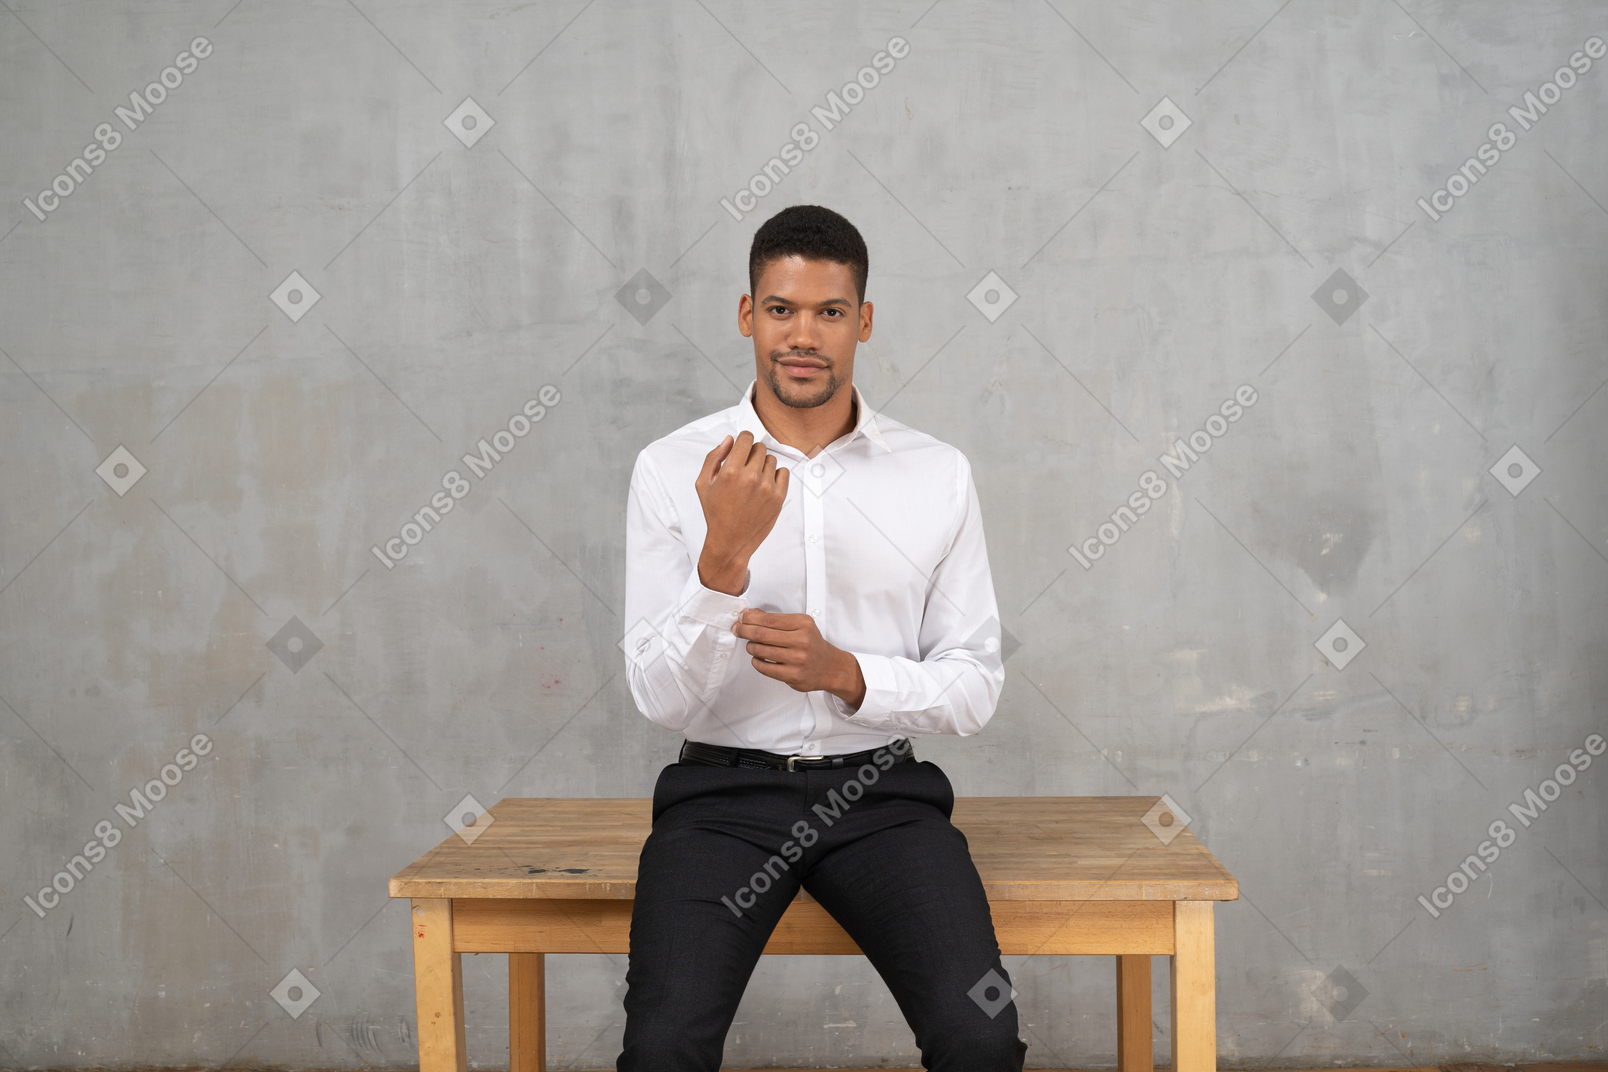 Smiling man in office clothes fixing his cuff